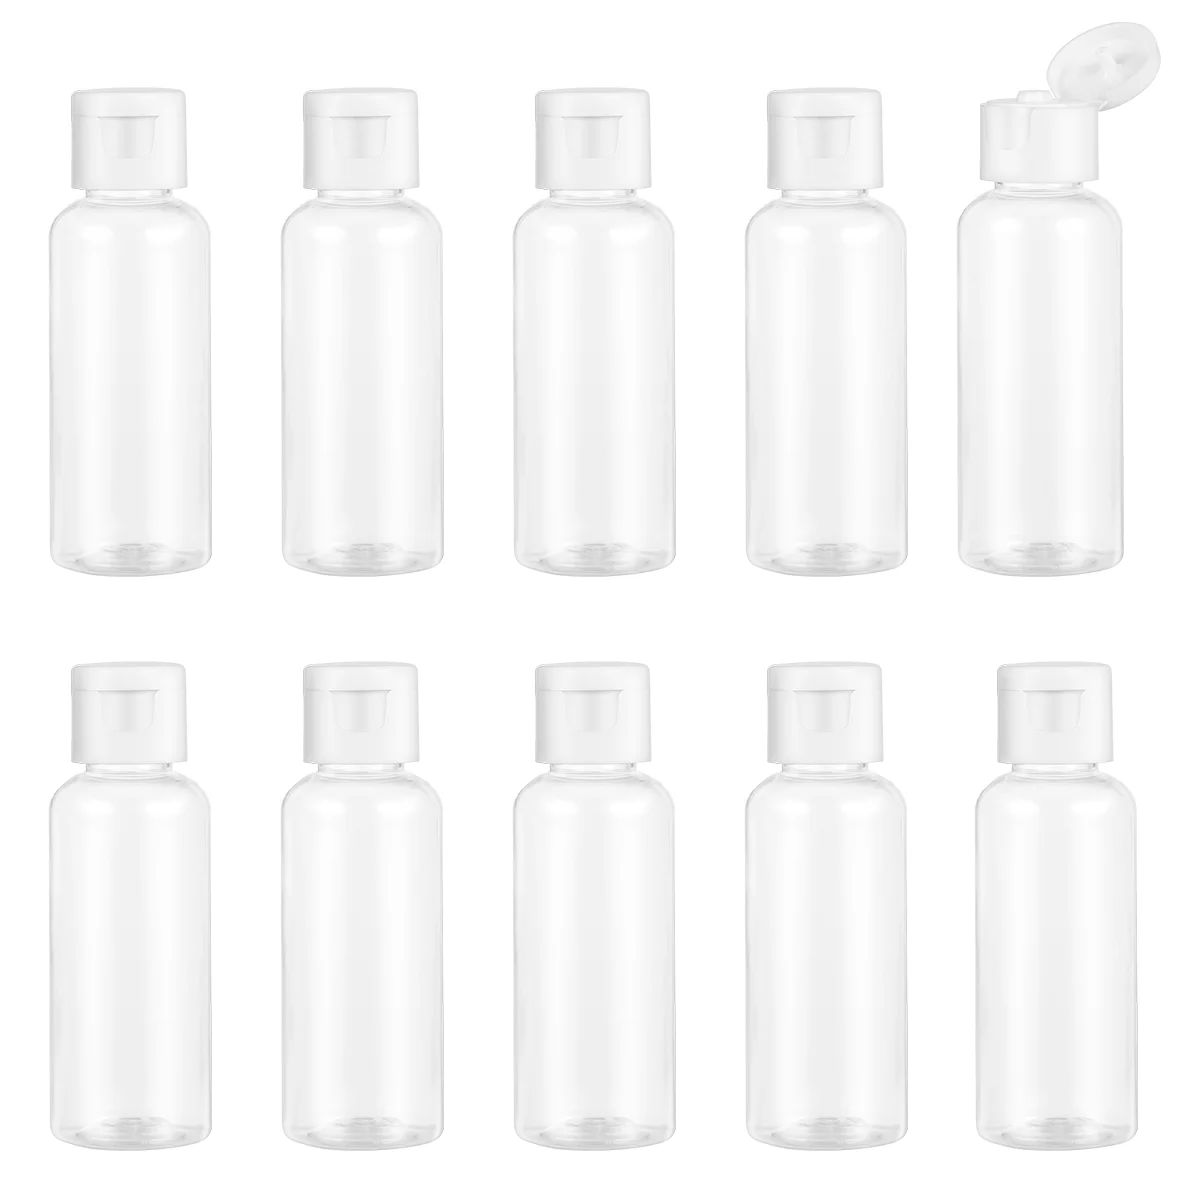 Plastic Travel Flask Refillable Travel Bottle Liquid Cosmetics Containers Shampoo Cream For Travel new rich hydrogen water bottle generator 5000ppb h2 flask 306 high concentration hydrogen water cup korean spe pem tech